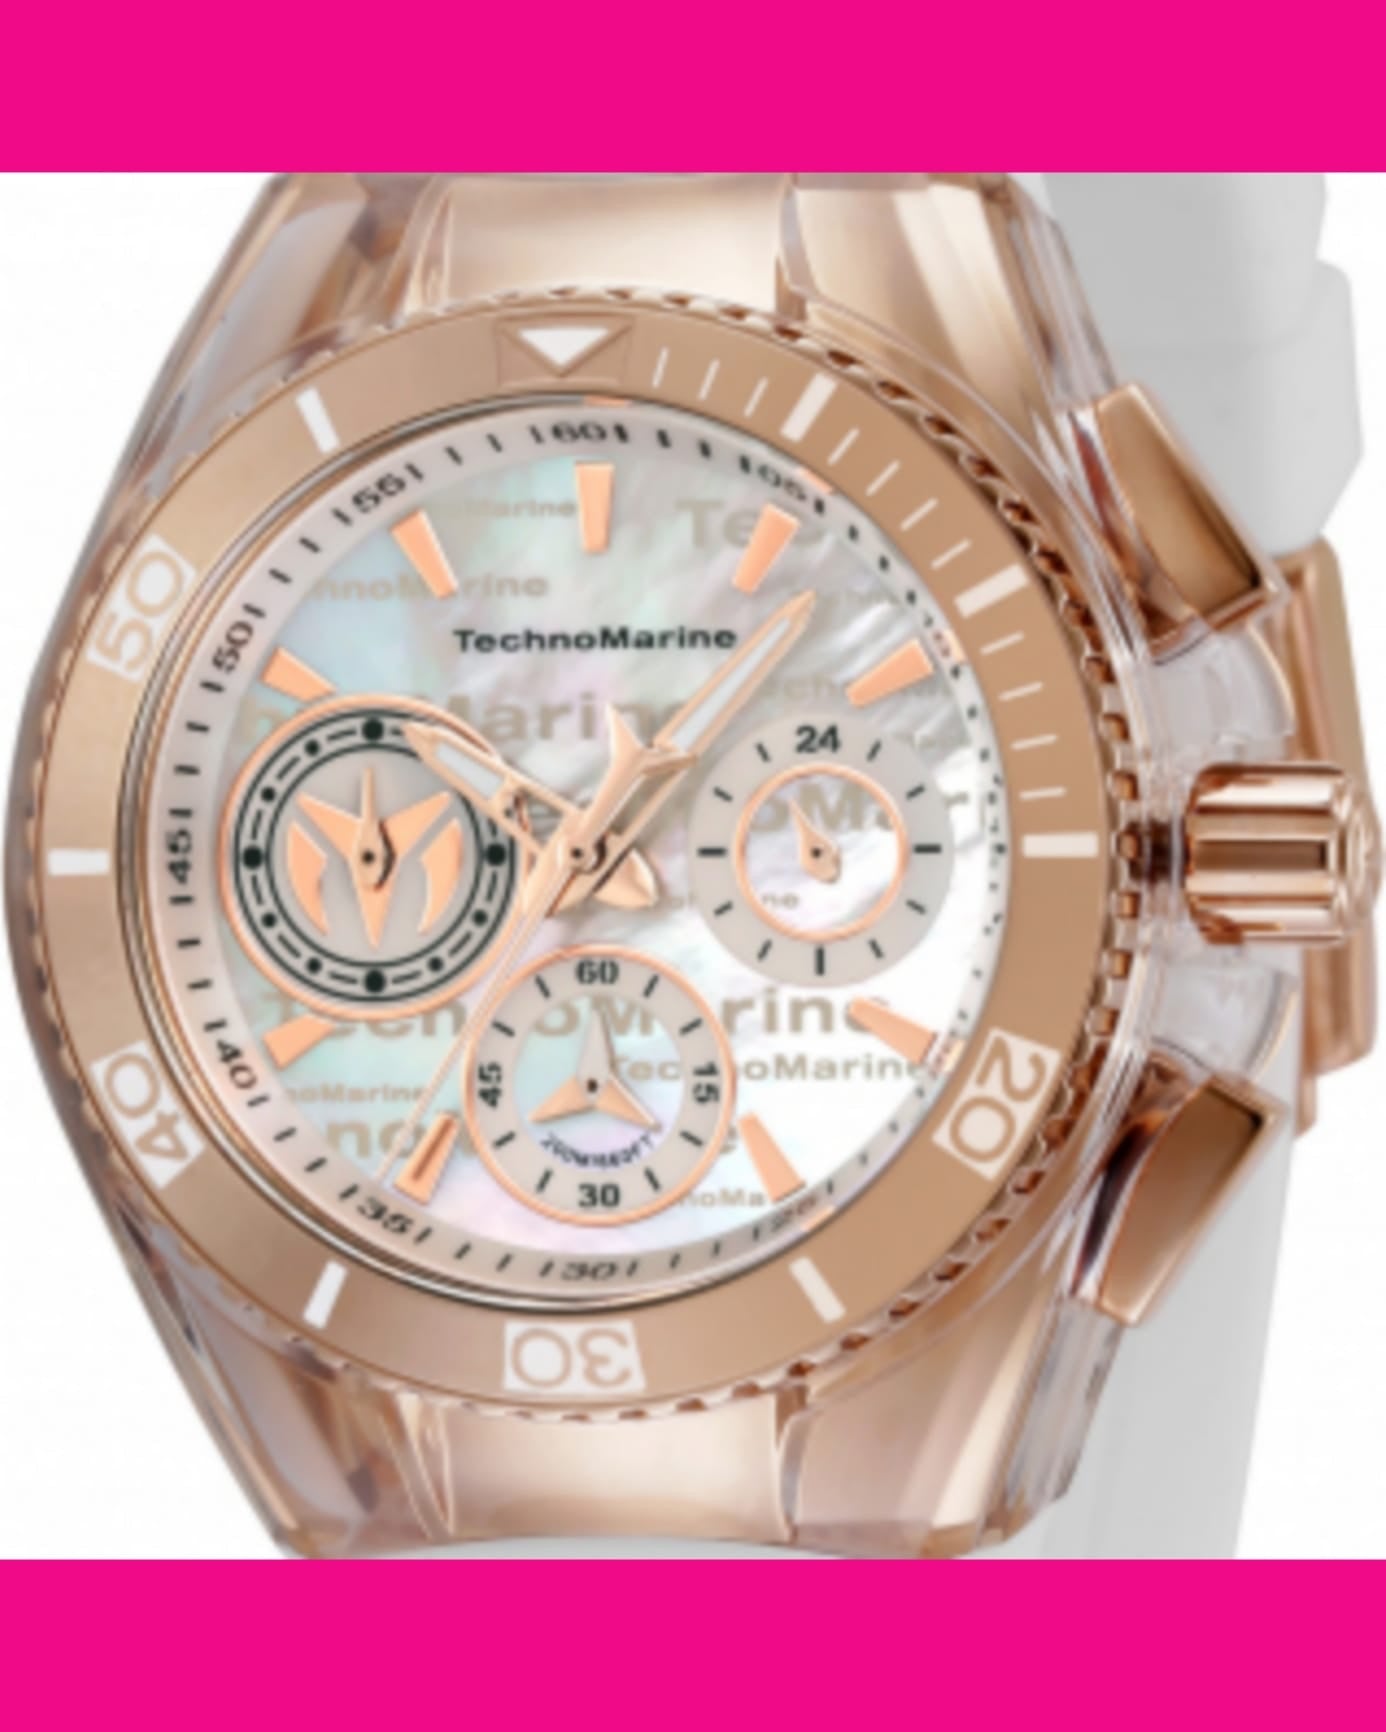 2 × 1 TechnoMarine Cruise California Women's Watch w/ Metal, Mother of Pearl & Oyster Dial - 40.57mm, White